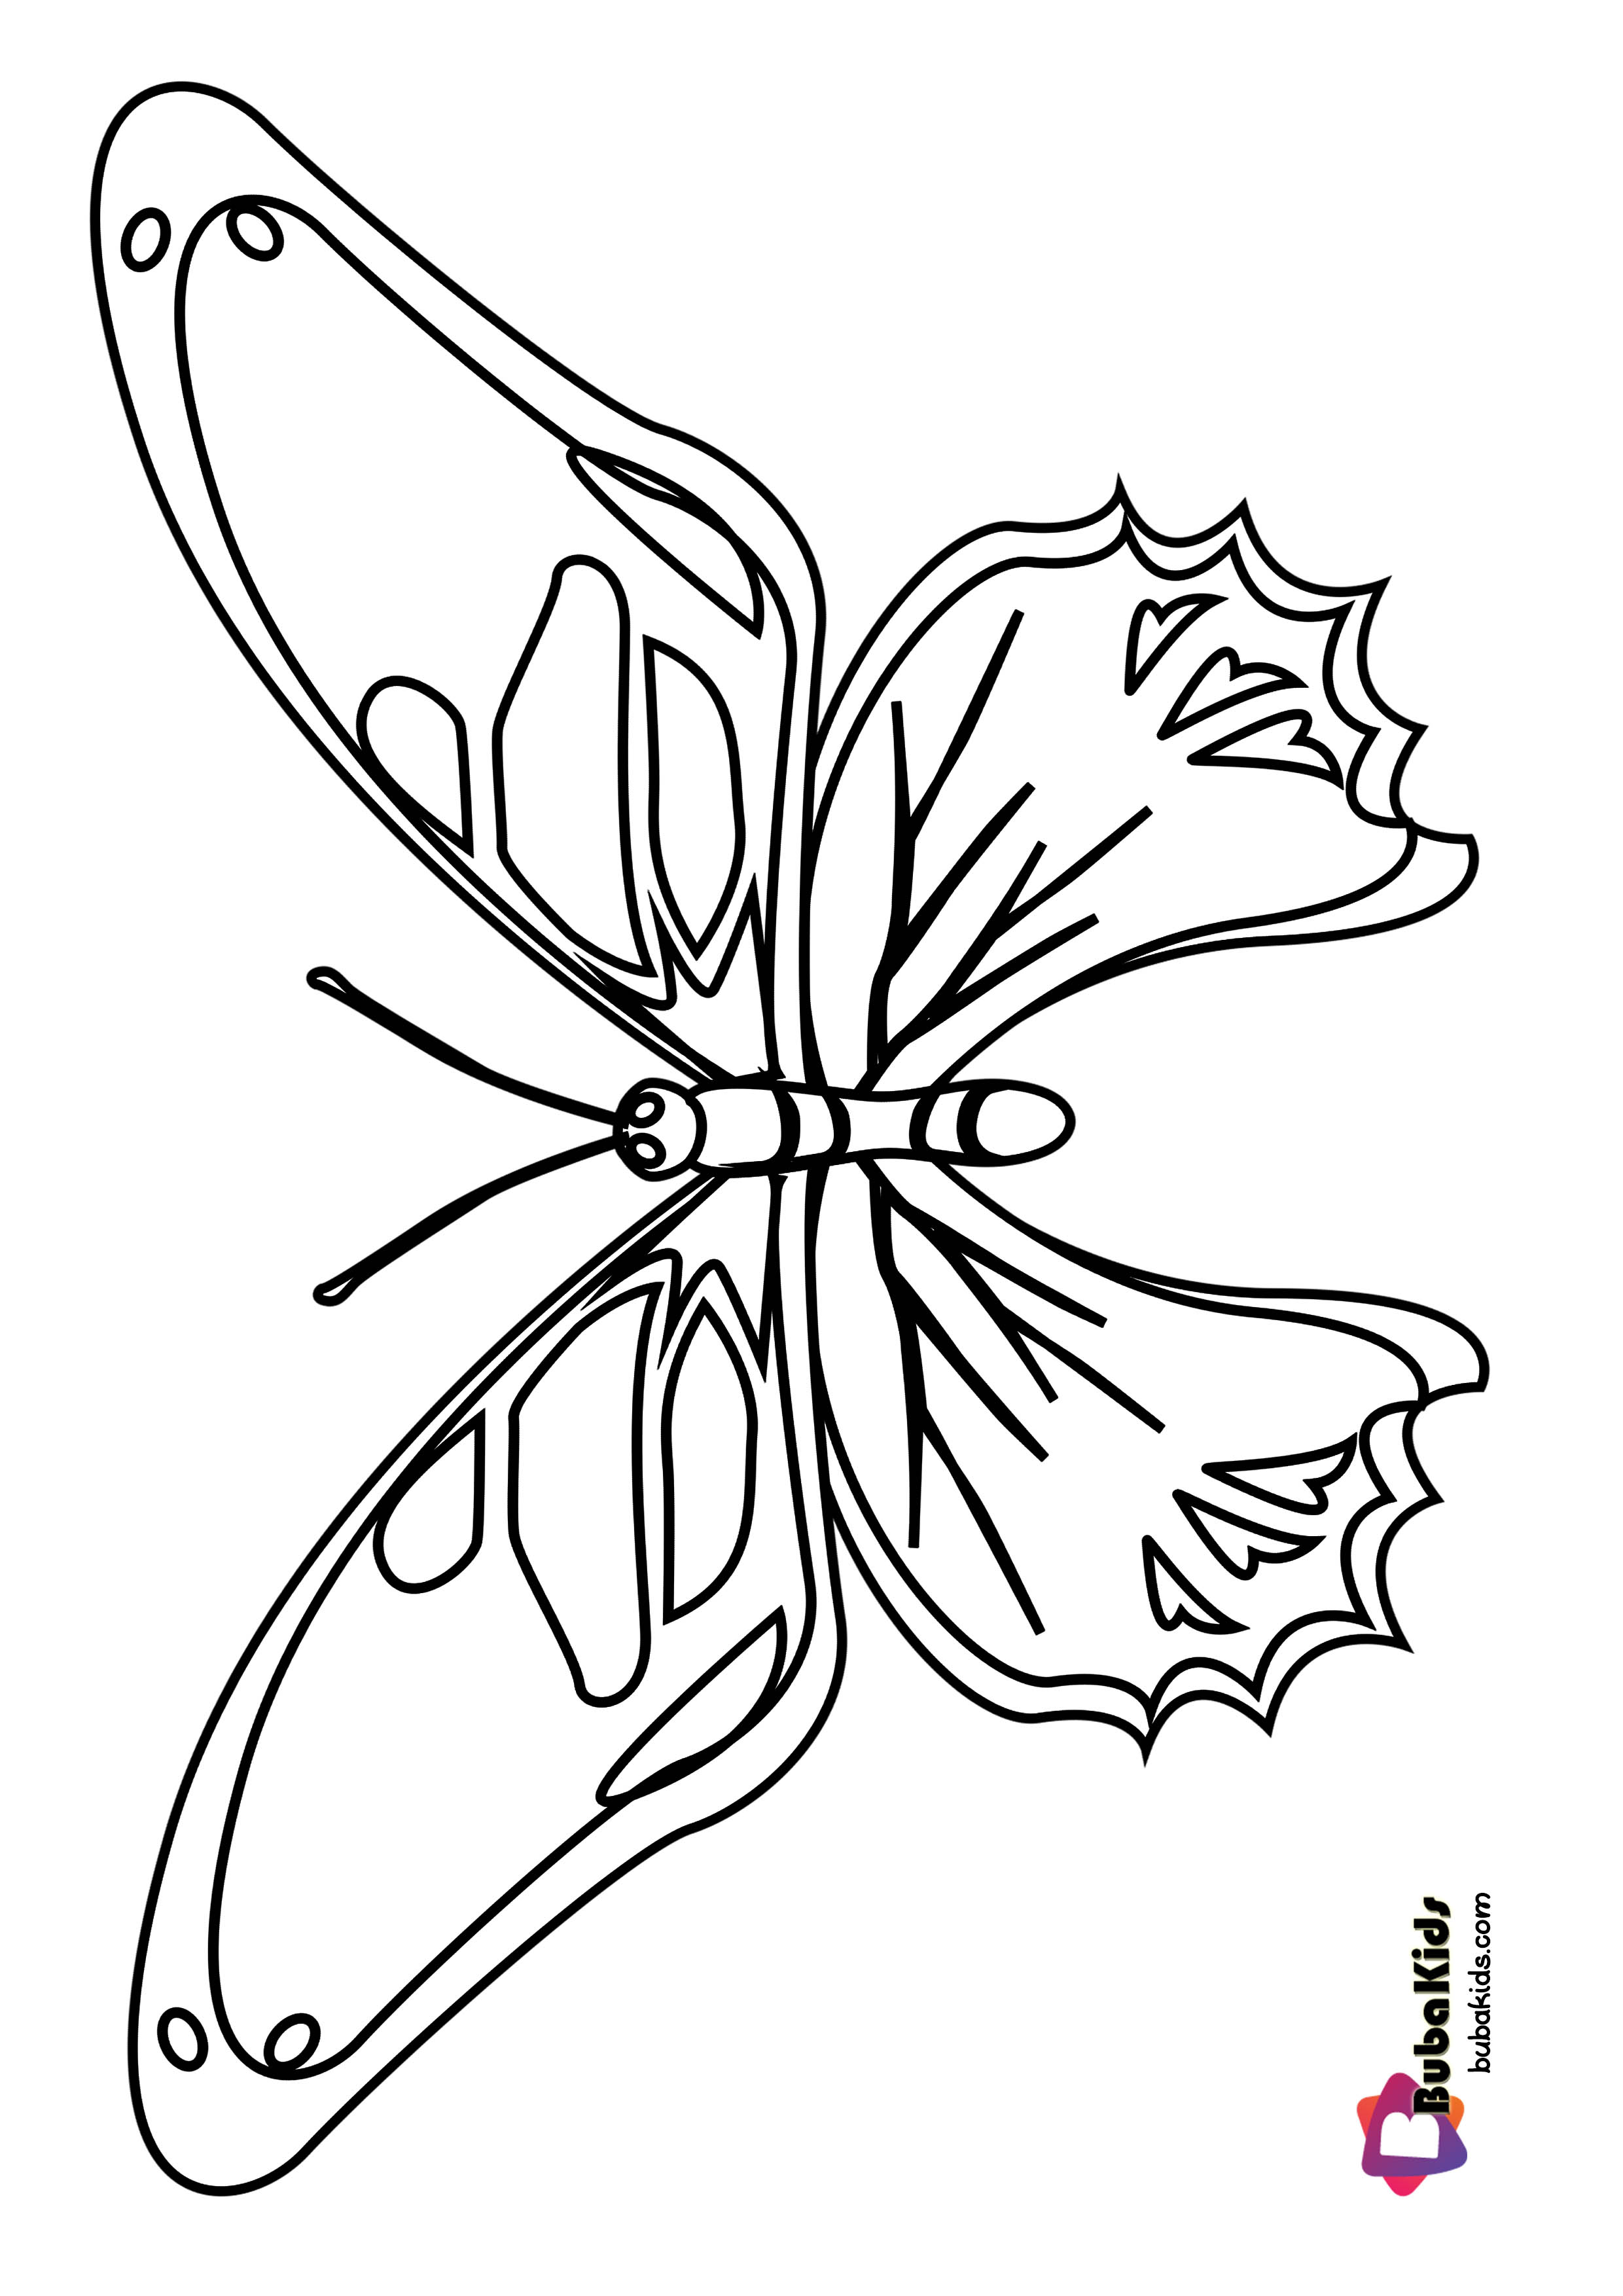 Bubakids Realistic Butterfly Coloring Page Wallpaper